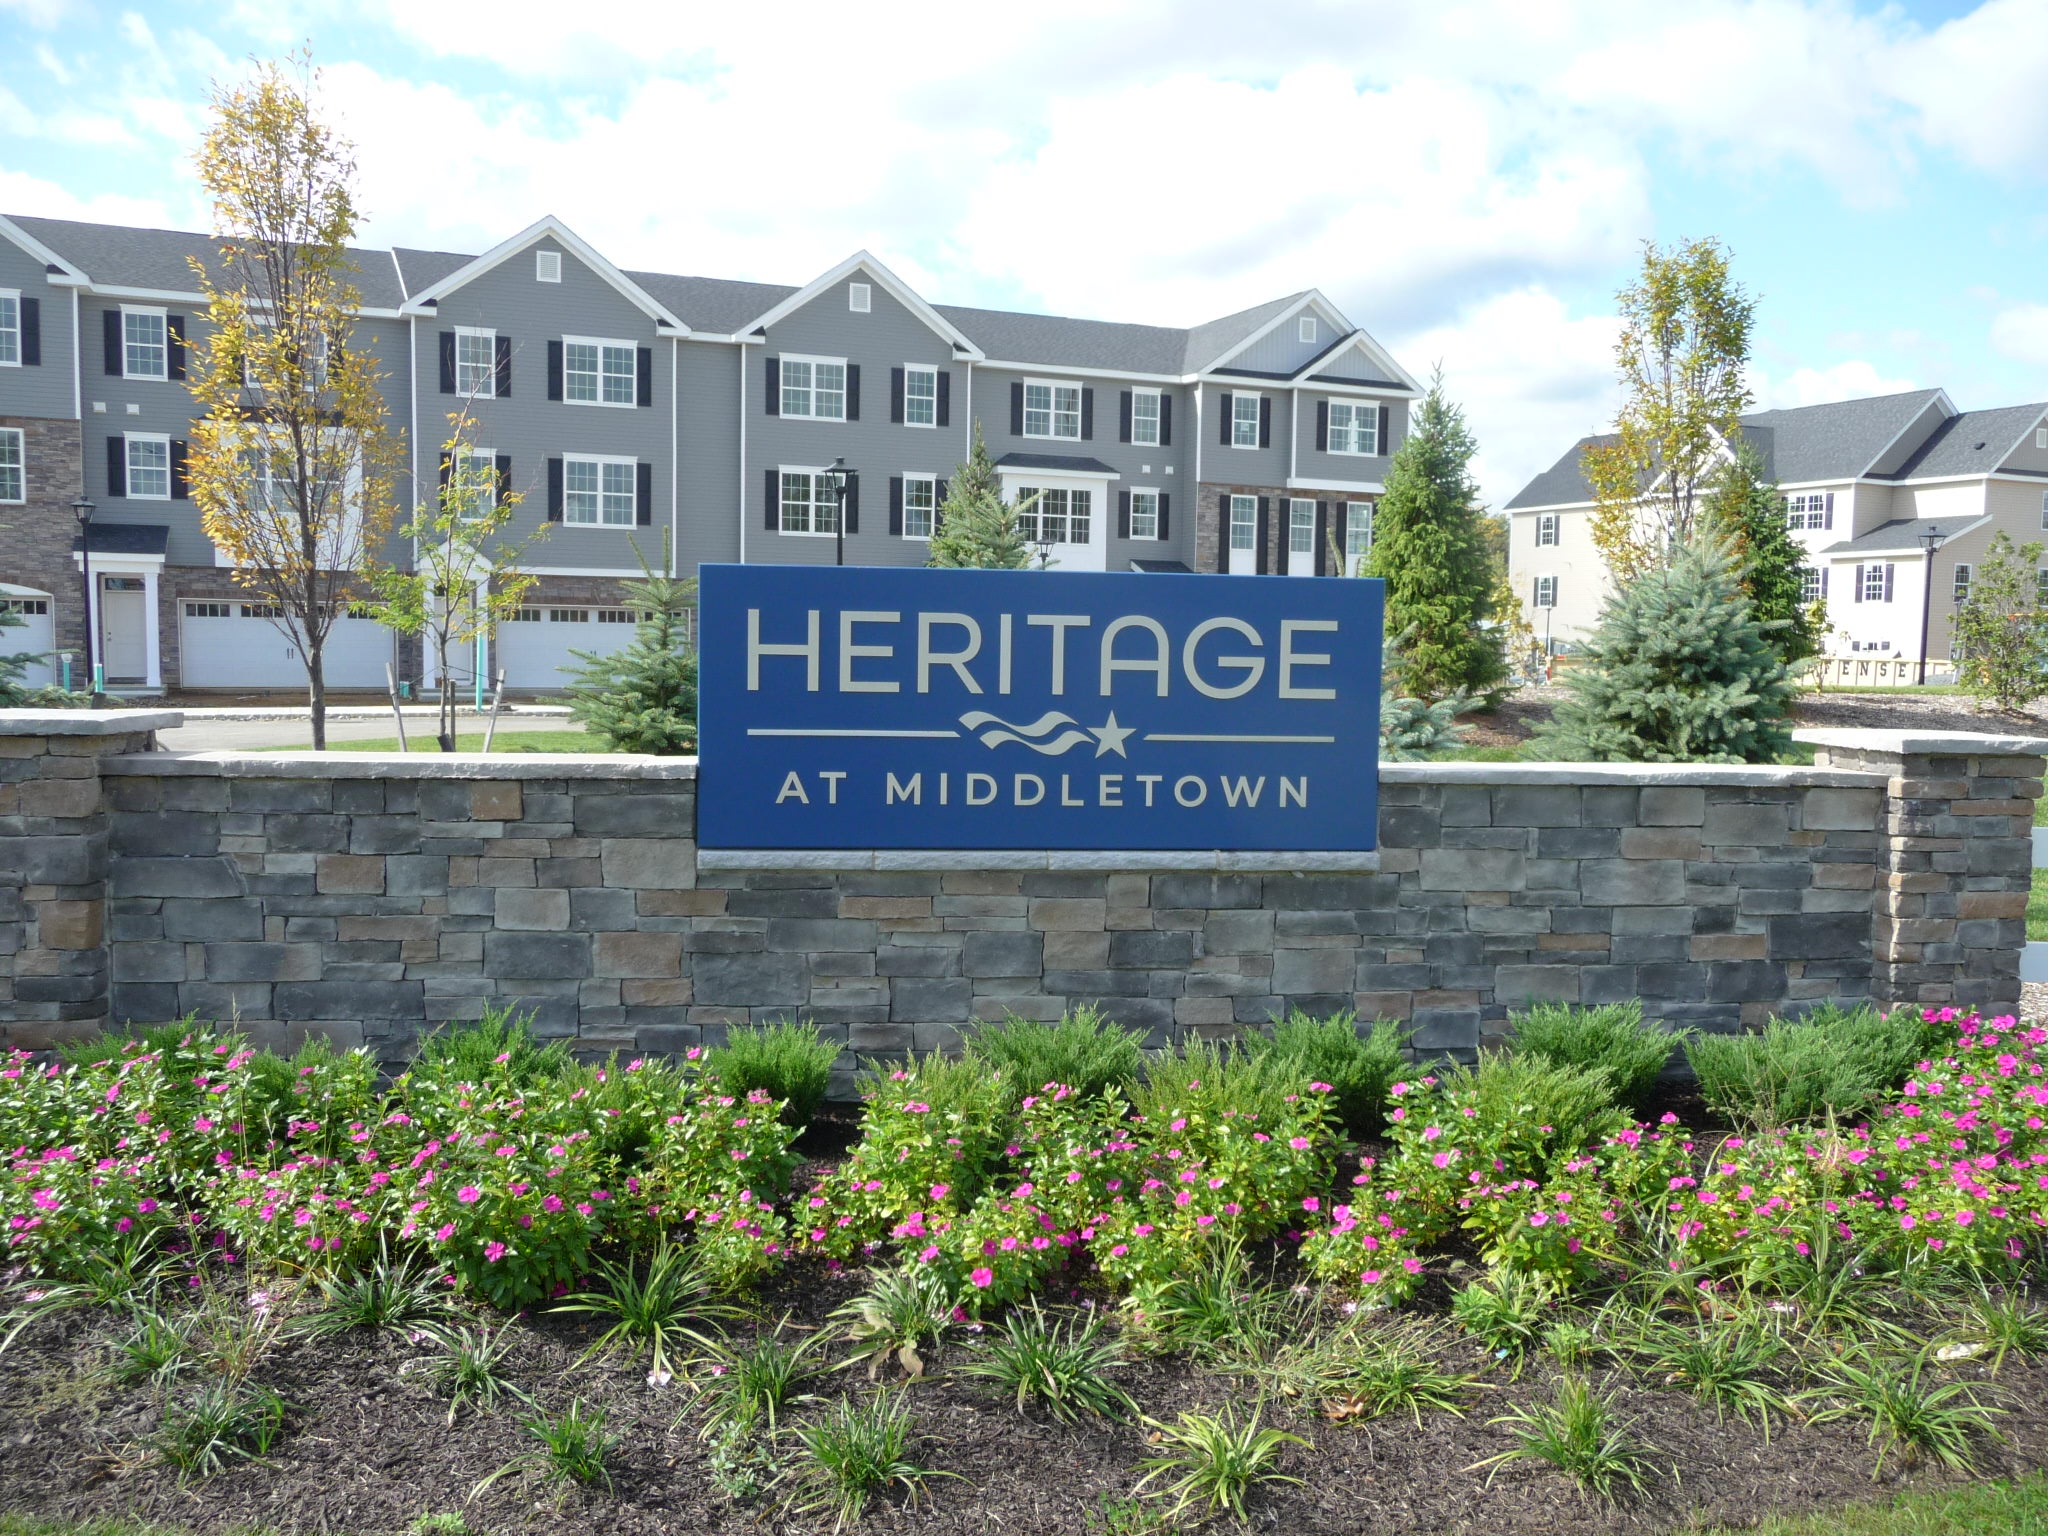 Picture of the entry sign with residences in the background.